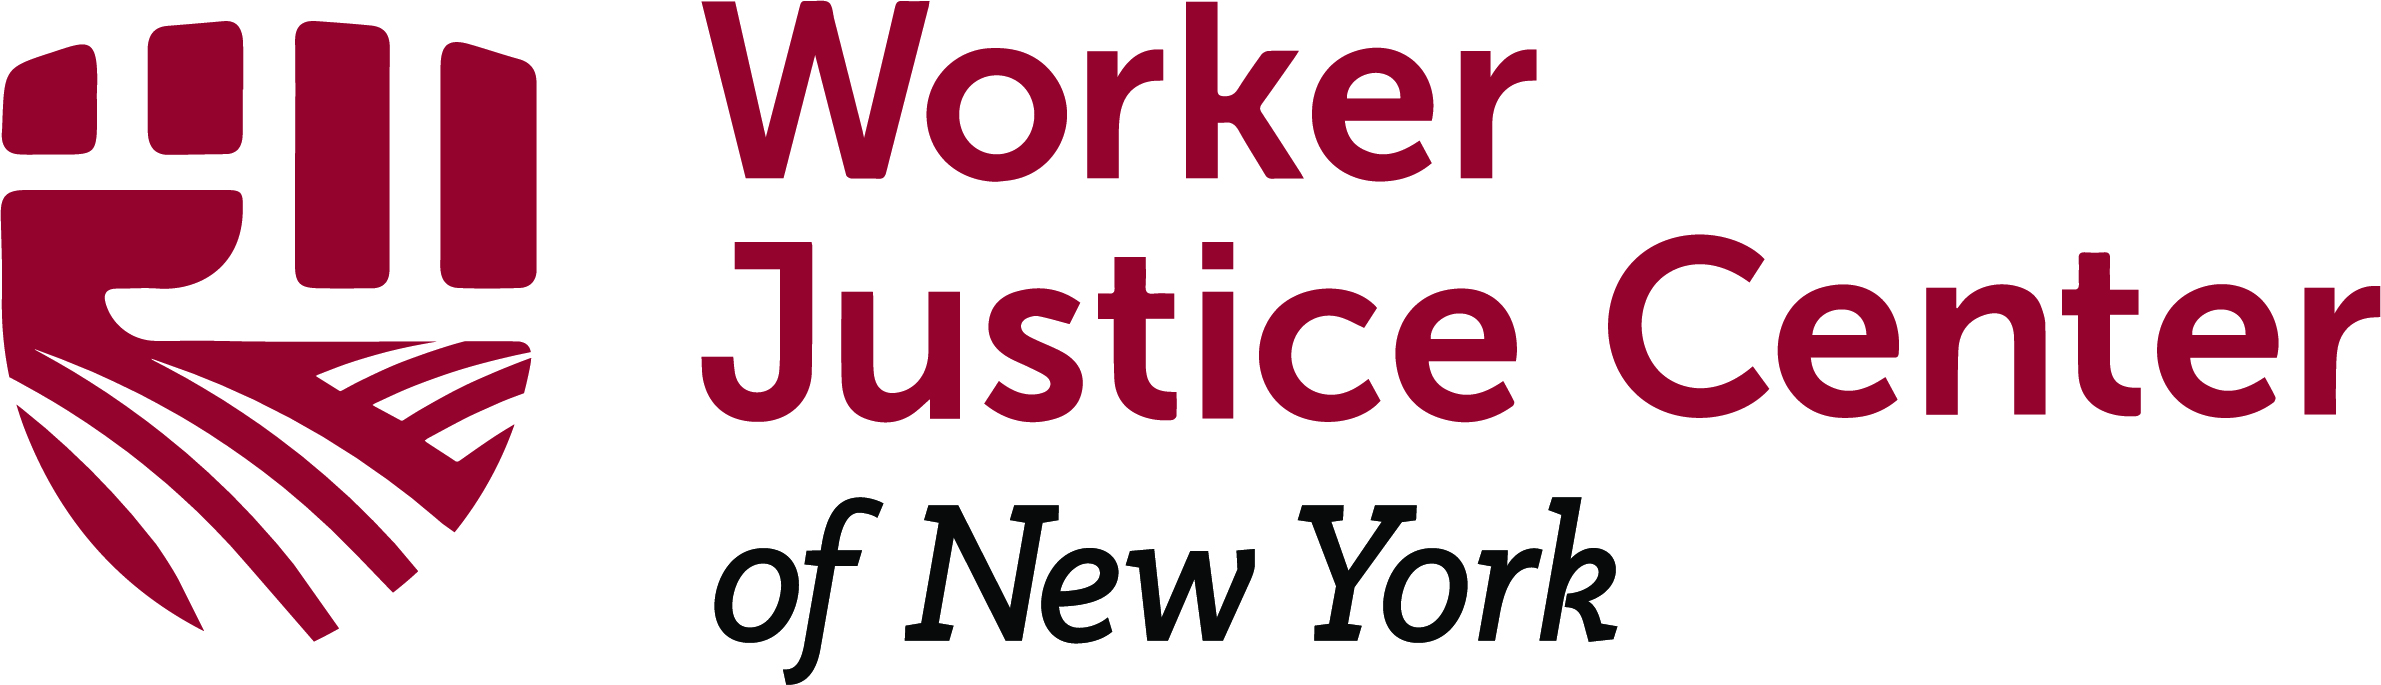 Worker Justice Center of New York